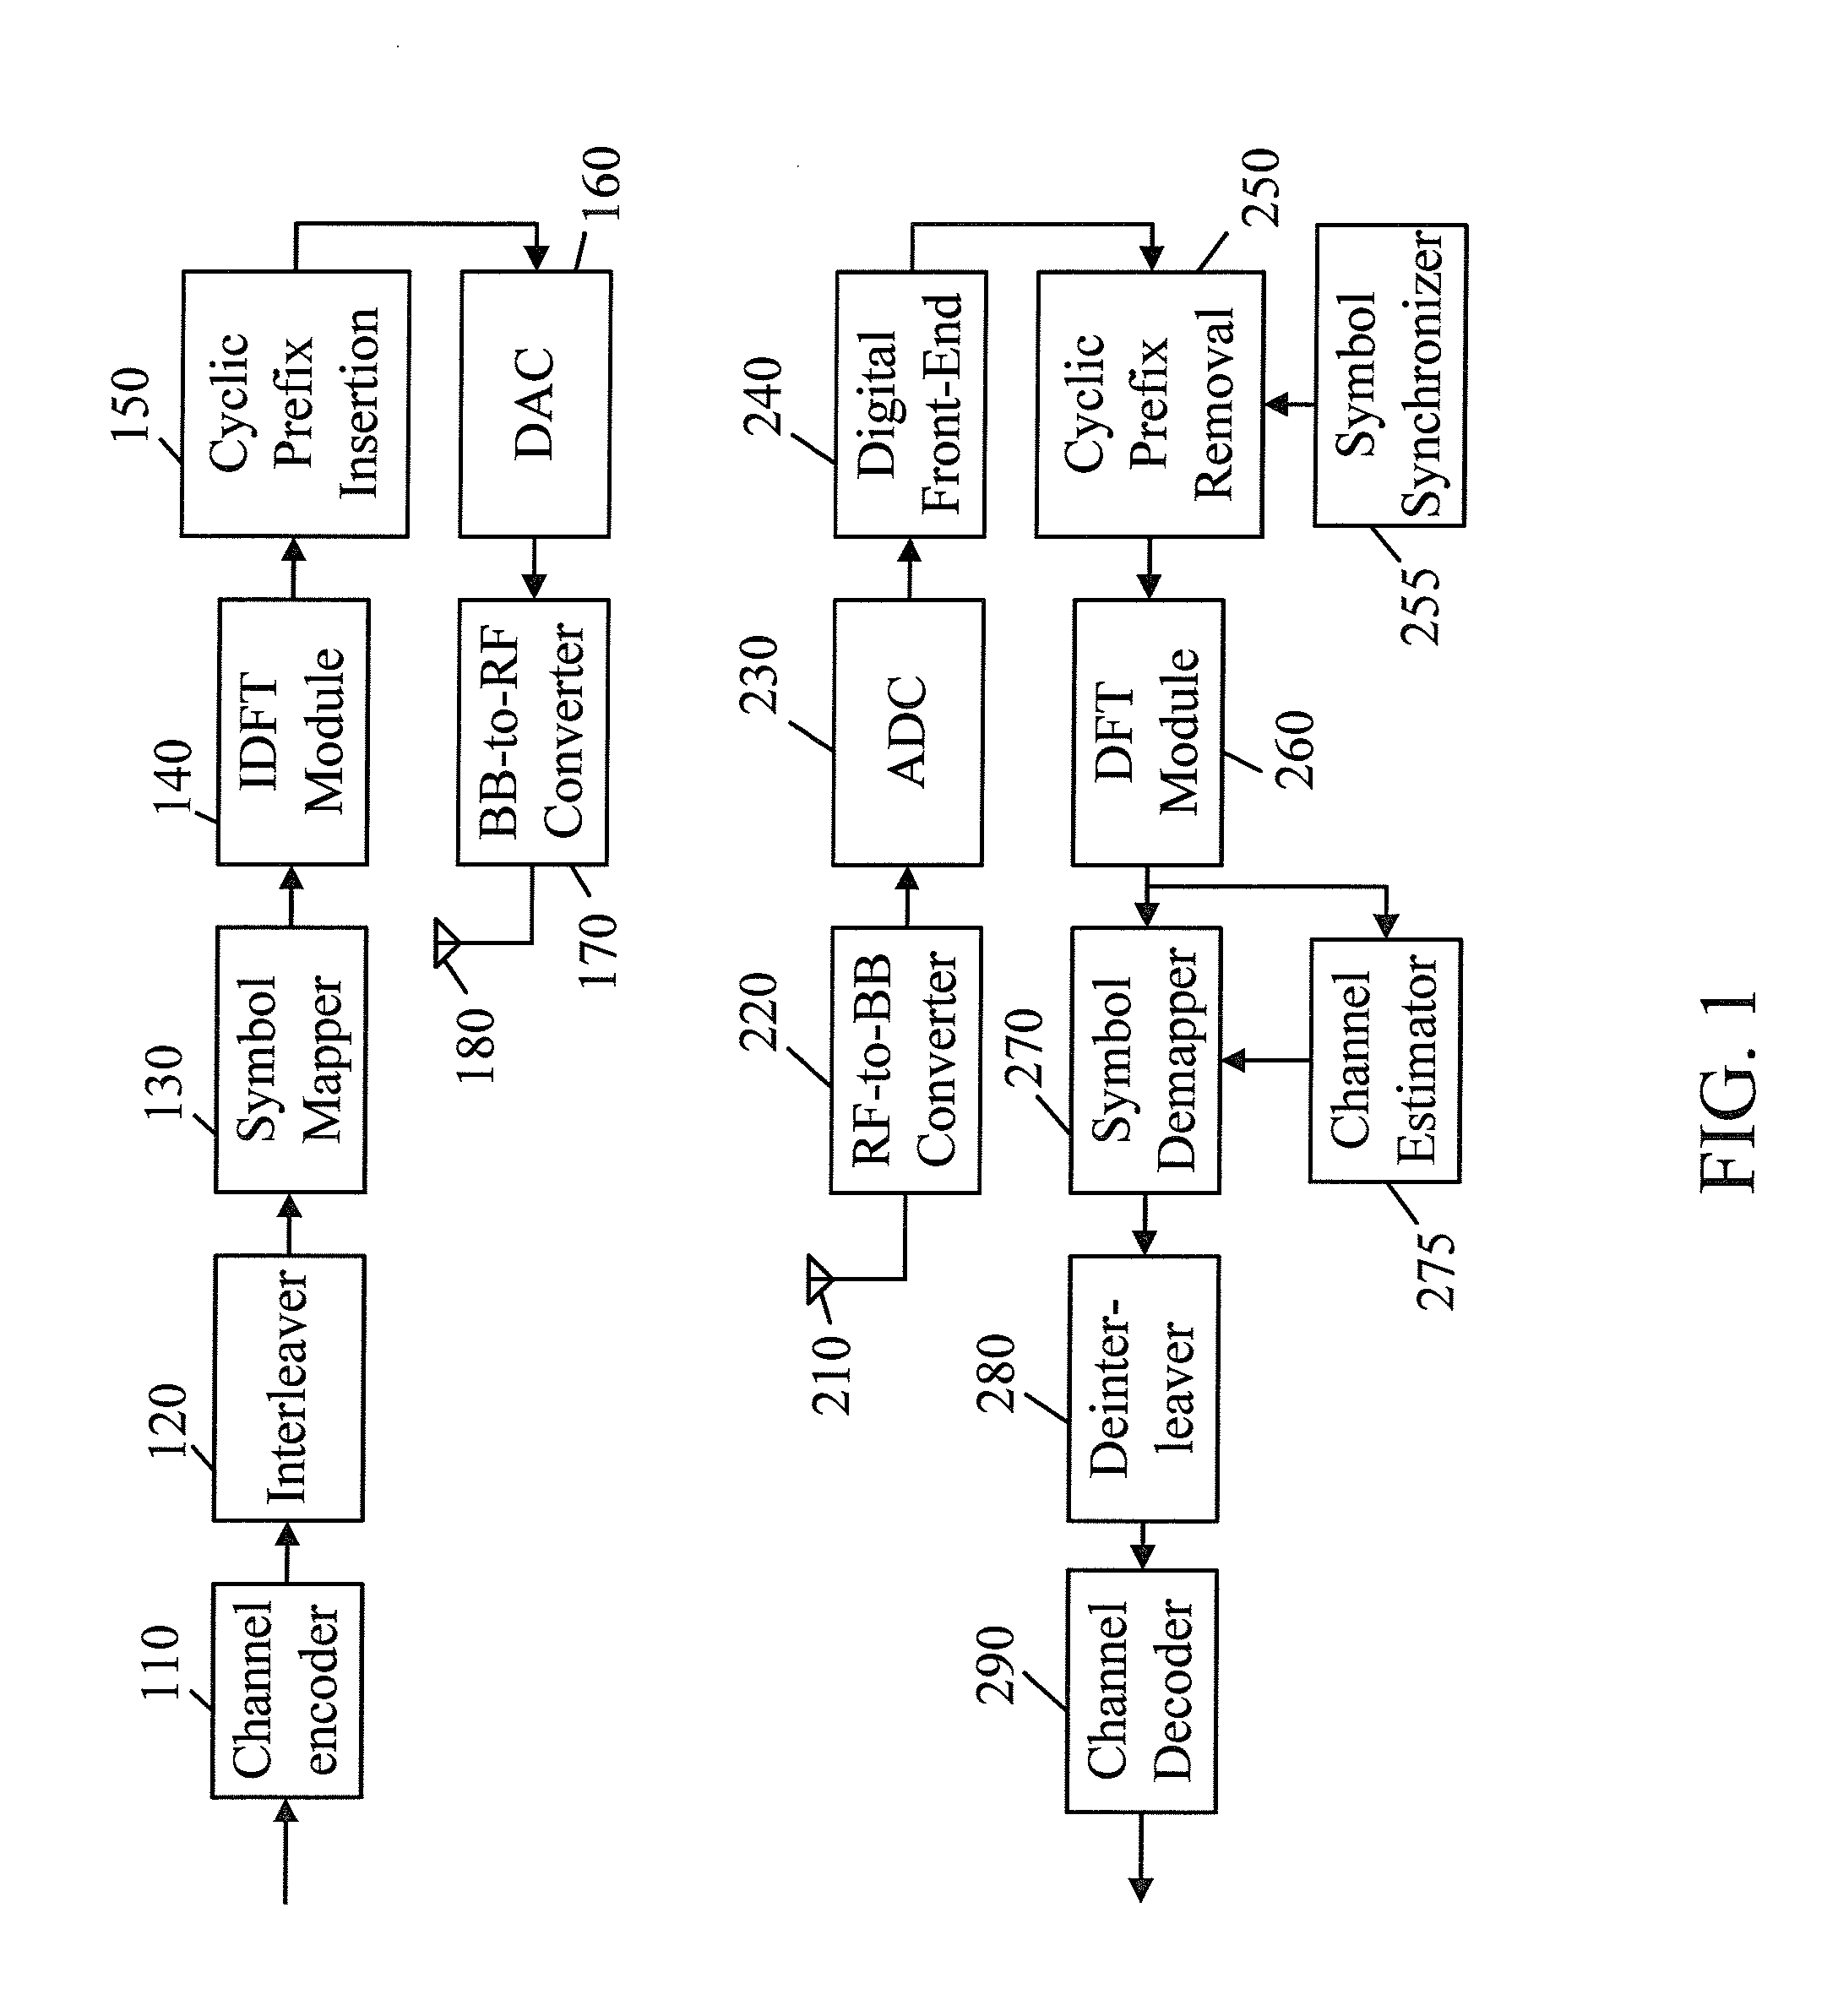 Estimating method for maximum channel delay and cyclic prefix (CP) averaging method in OFDM receiver